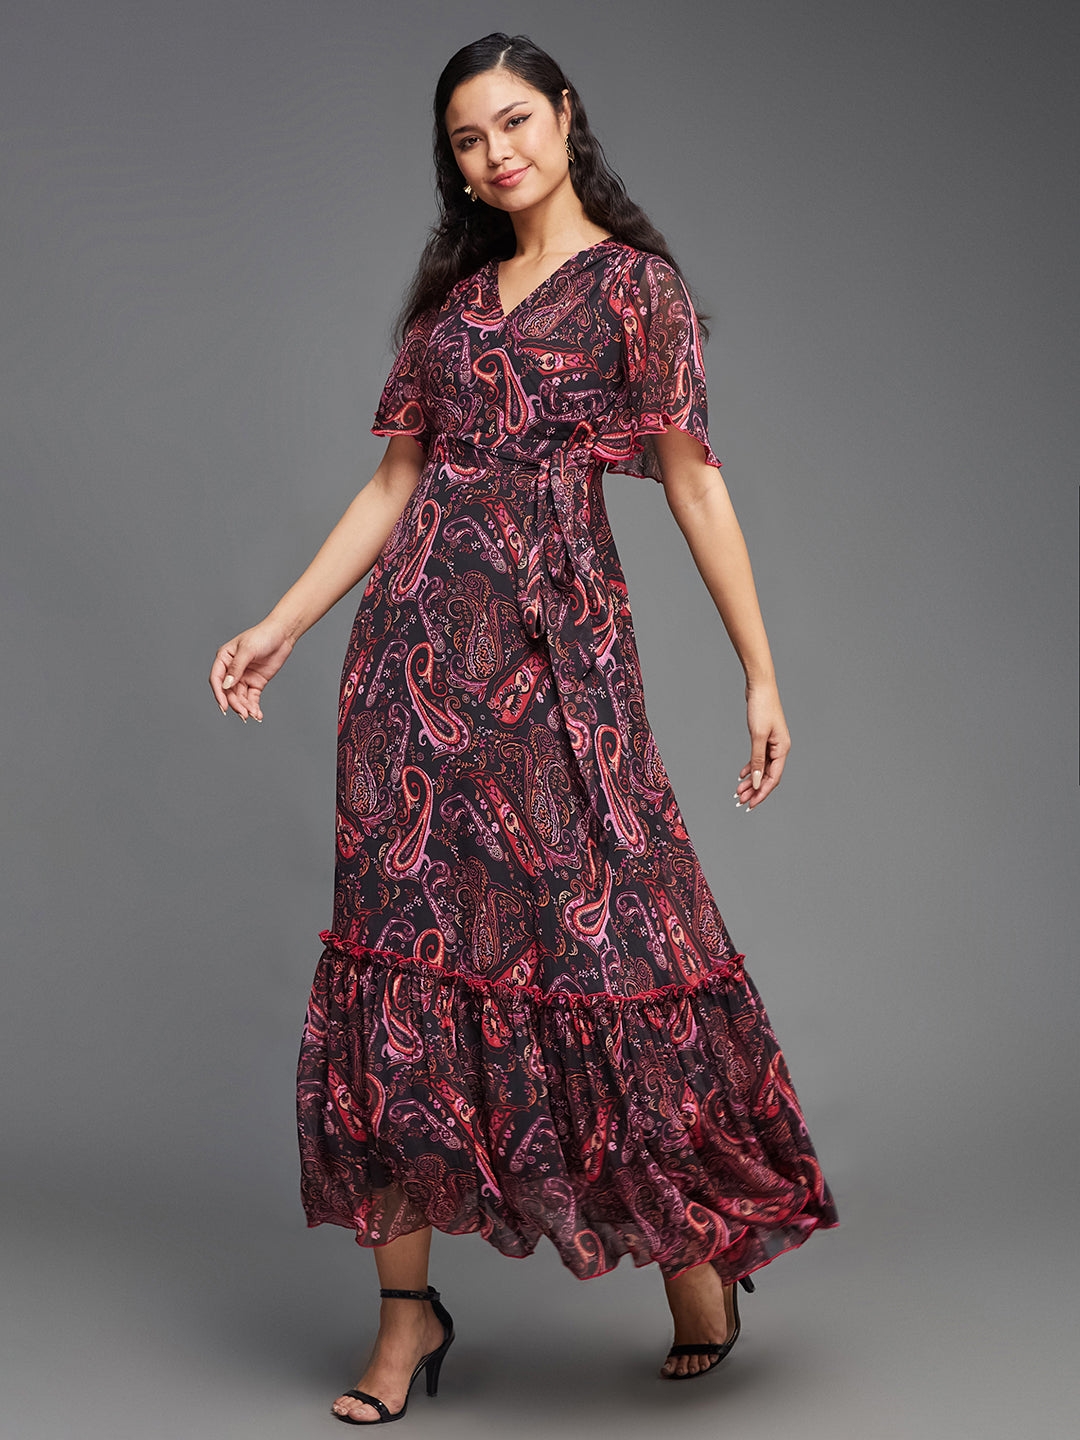 Multicolored-Base-Black Bohemian V-Neck Flutter Sleeve Chiffon Relaxed Fit Wrap Maxi Dress